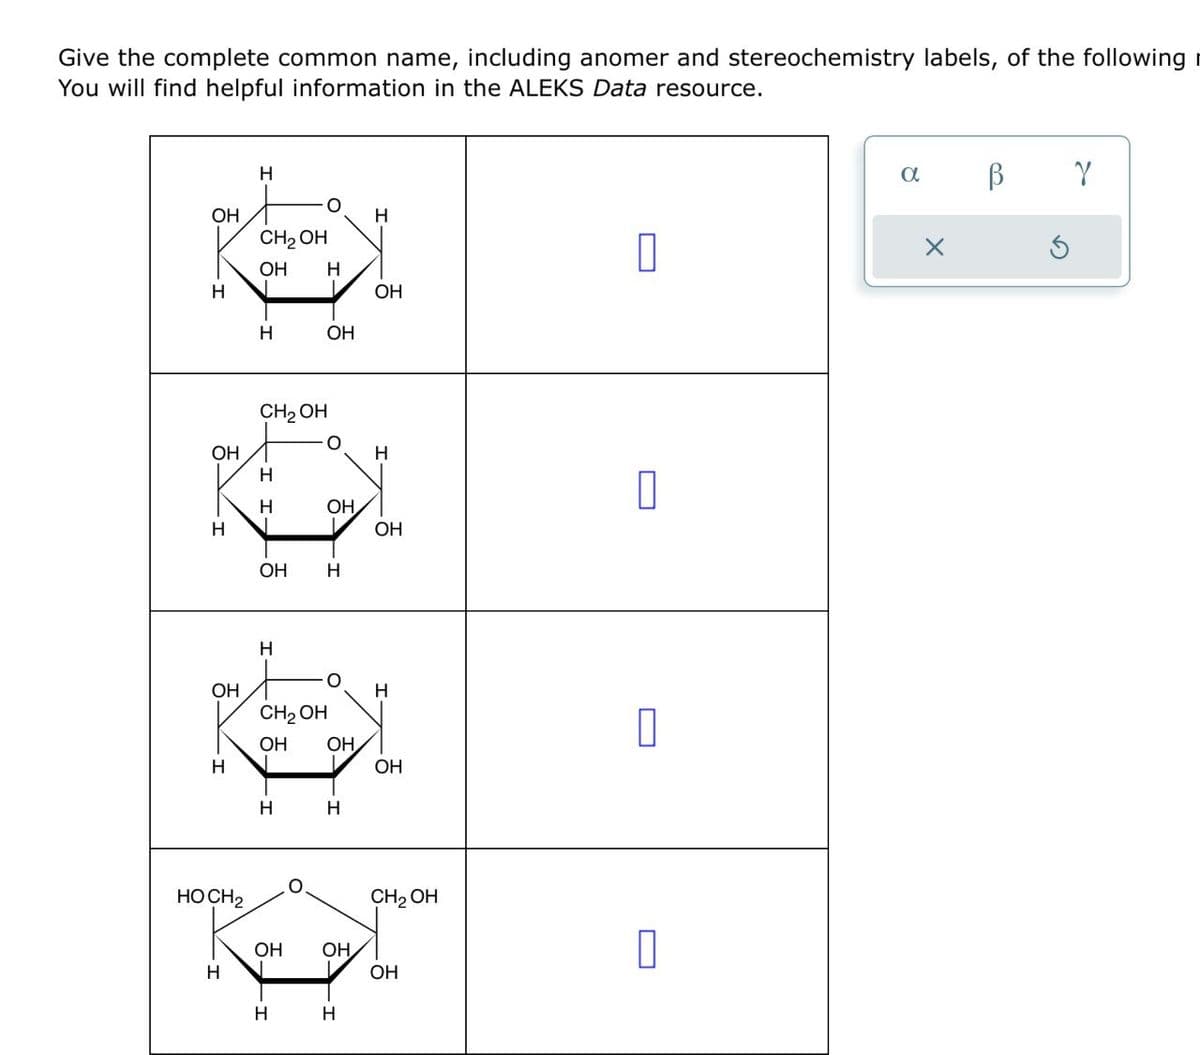 Give the complete common name, including anomer and stereochemistry labels, of the following
You will find helpful information in the ALEKS Data resource.
H
Он
CH2OH
H
Он H
☐
Н
Он
H
ОН
CH2OH
Он
H
H
H
OH
Н
ОН
ОН
H
H
O
ОН
Н
CH2OH
Он Он
Н
ОН
Н
H
HOCH 2
H
CH2OH
Он
Он
☐
ОН
Н
H
α
В
γ
x